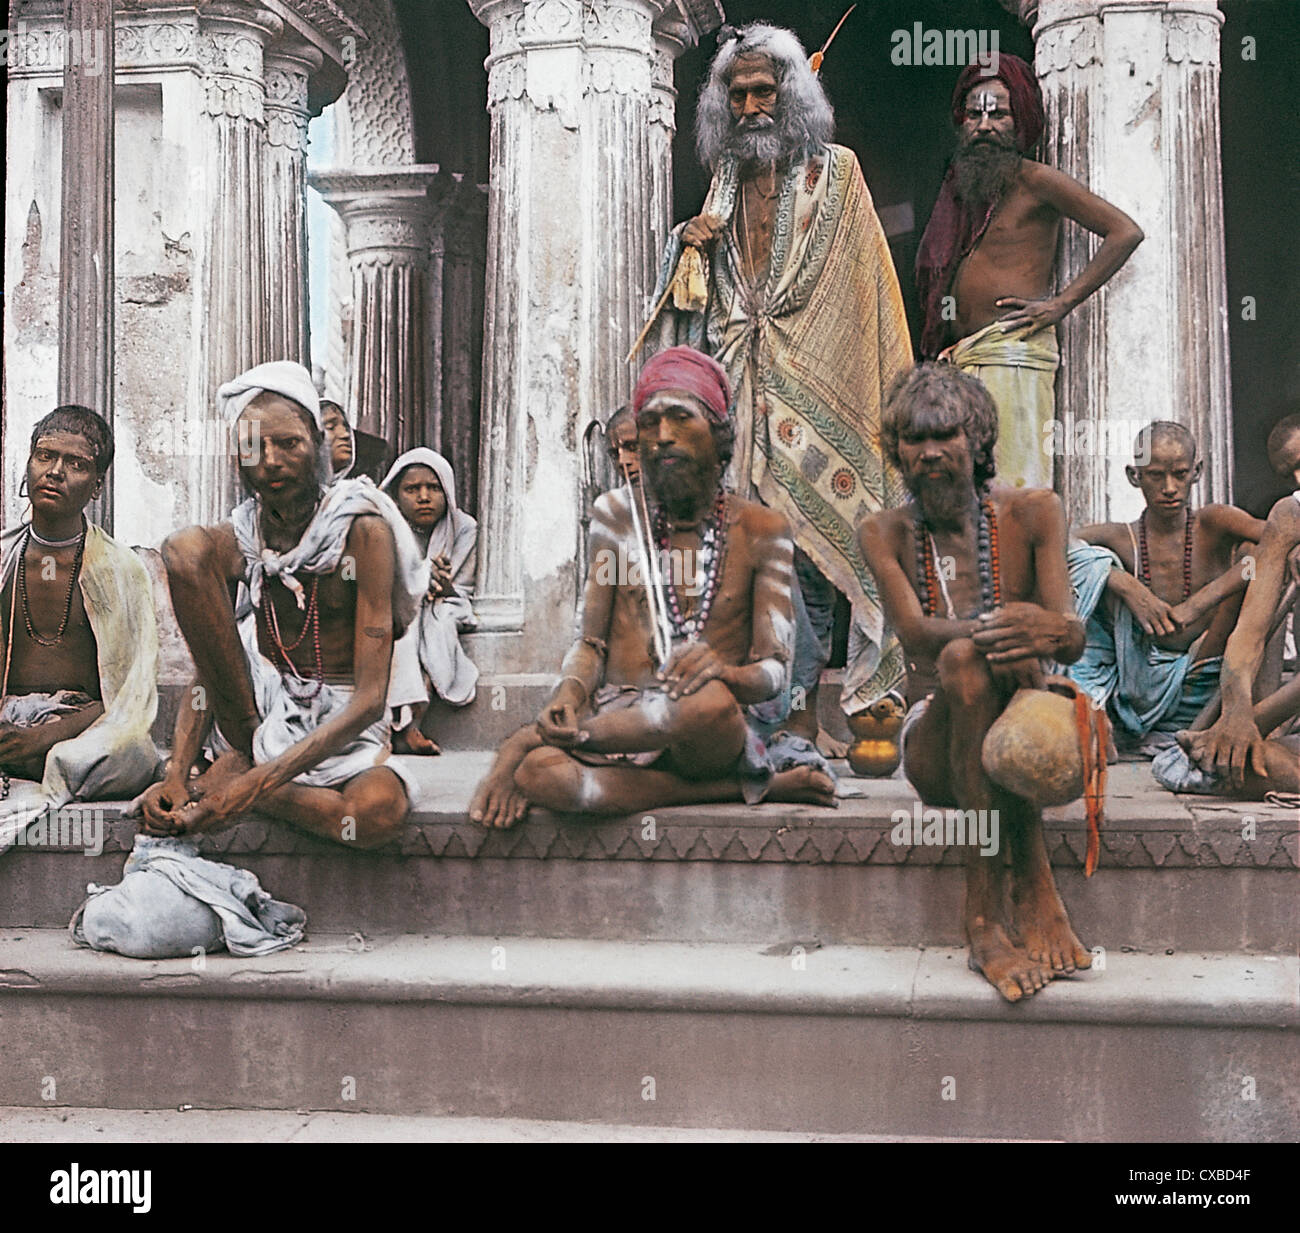 Colorized portrait of a group of pilgrims sitting on steps near the Ganges in Varanasi, also known as Benares, India, 1912. (Photo by Burton Holmes) Stock Photo